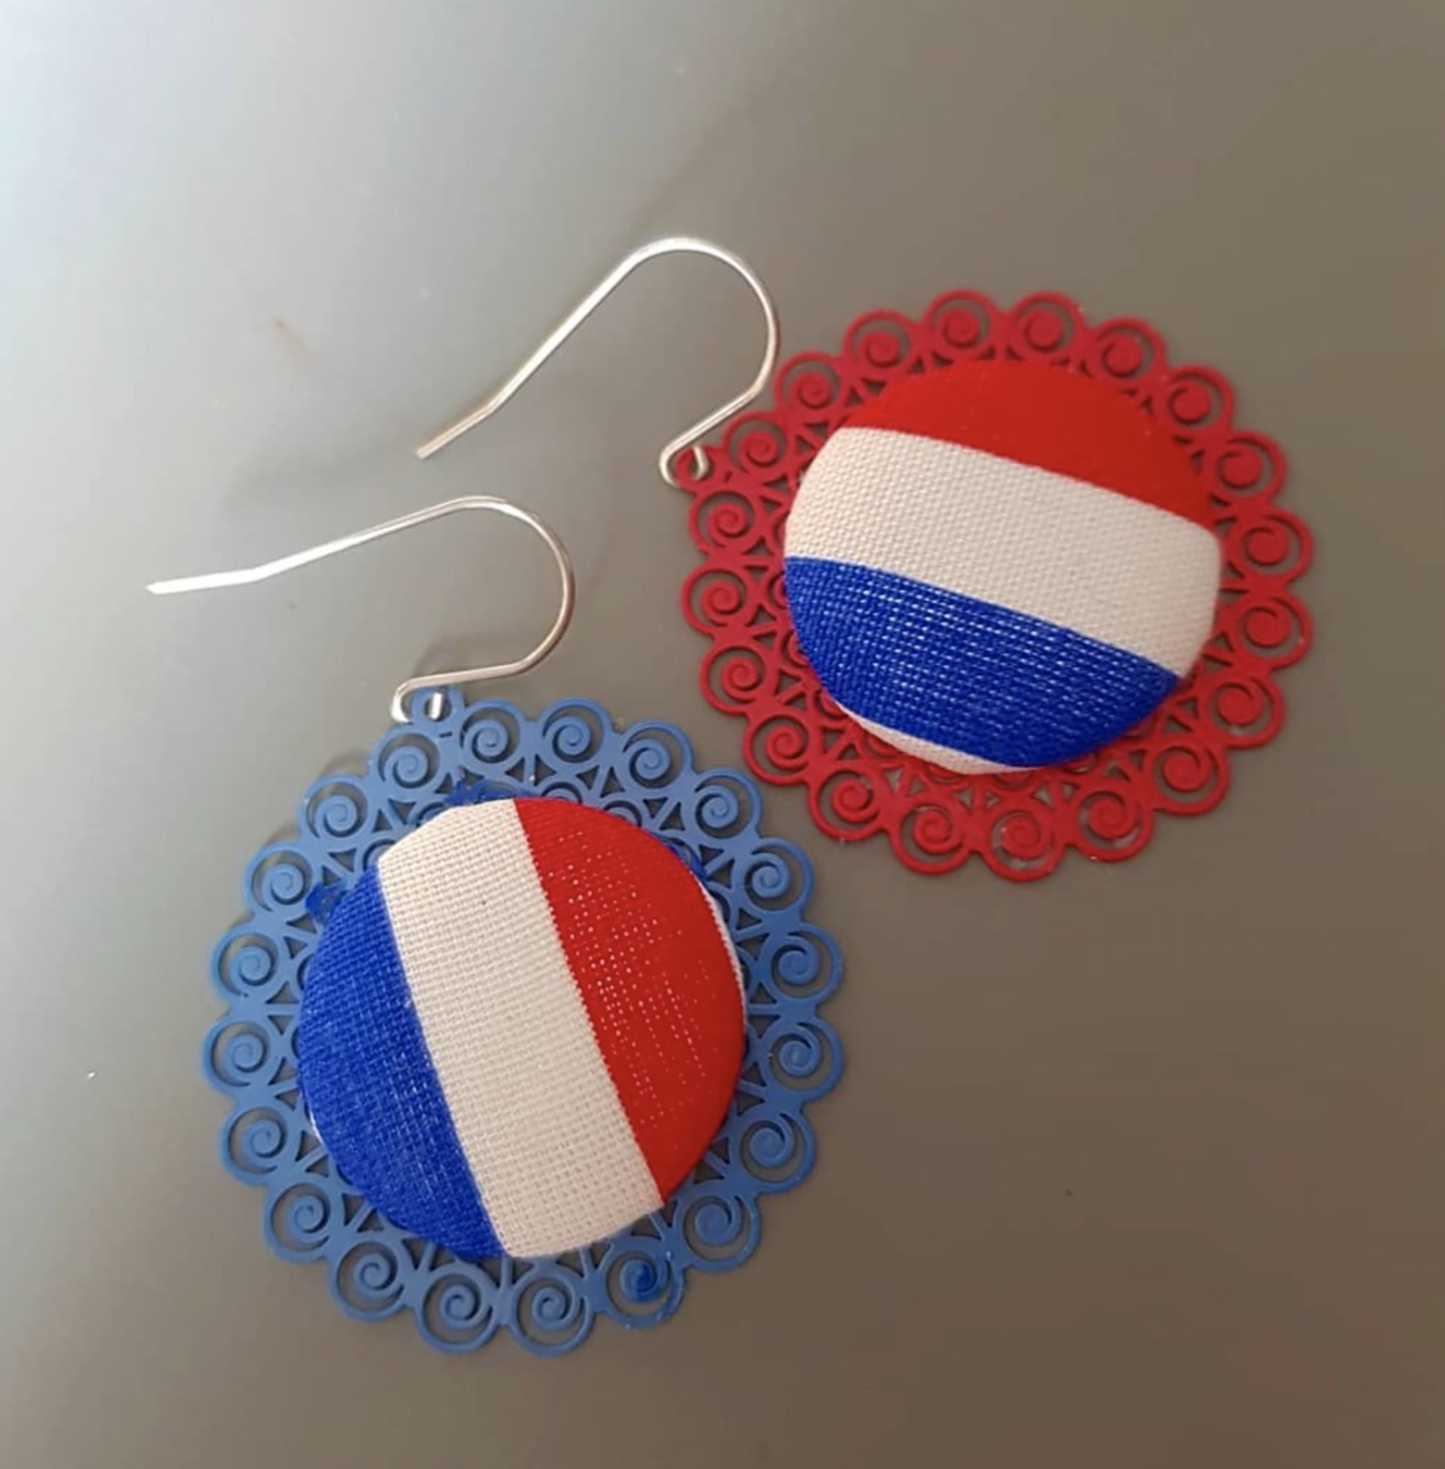 "Celebrate Unity in Style: Dynamic French Flag Earrings"